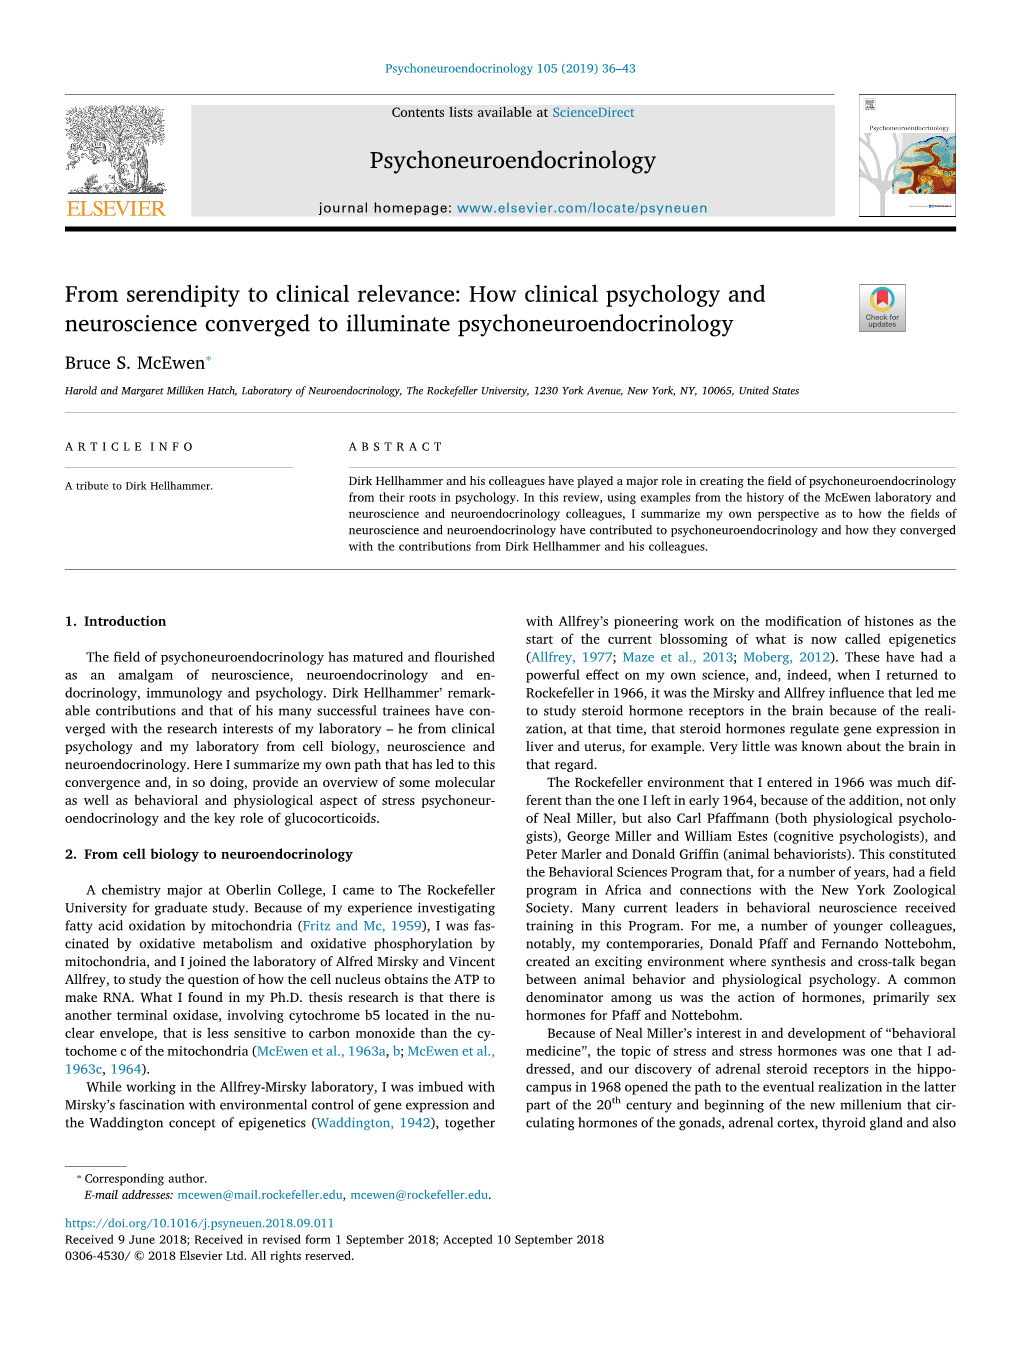 From Serendipity to Clinical Relevance How Clinical Psychology And